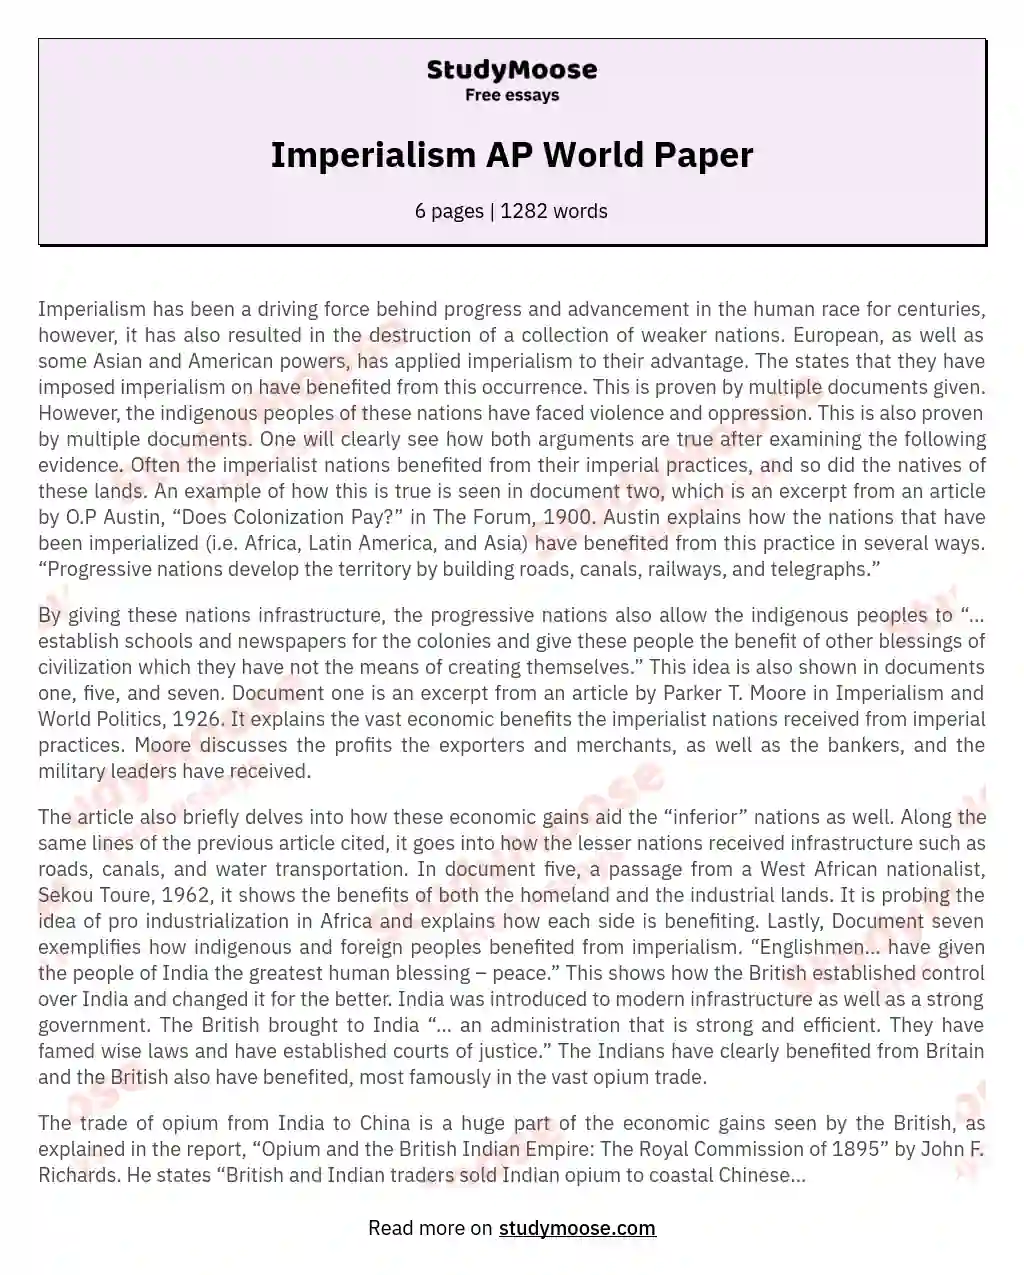 Imperialism AP World Paper